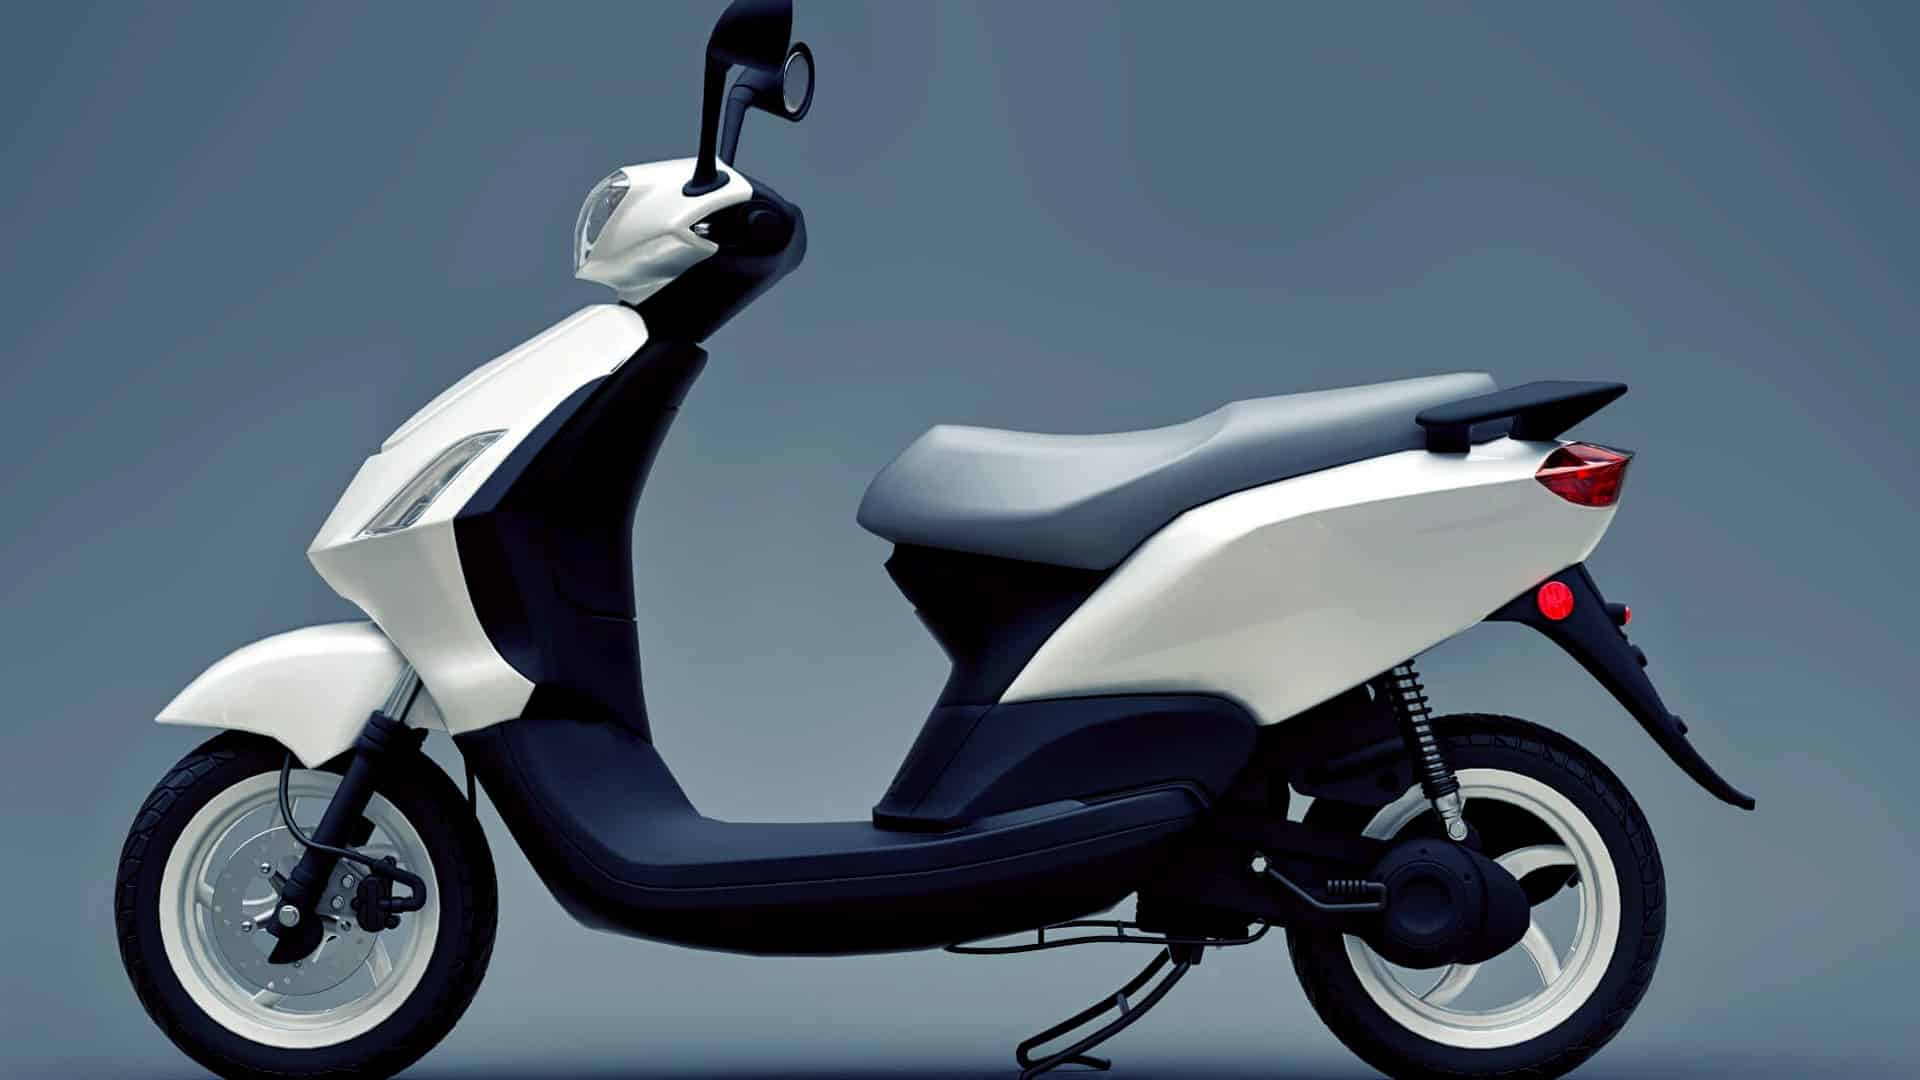 Napino Auto ties up with Israeli startup for electric two-wheeler manufacturing